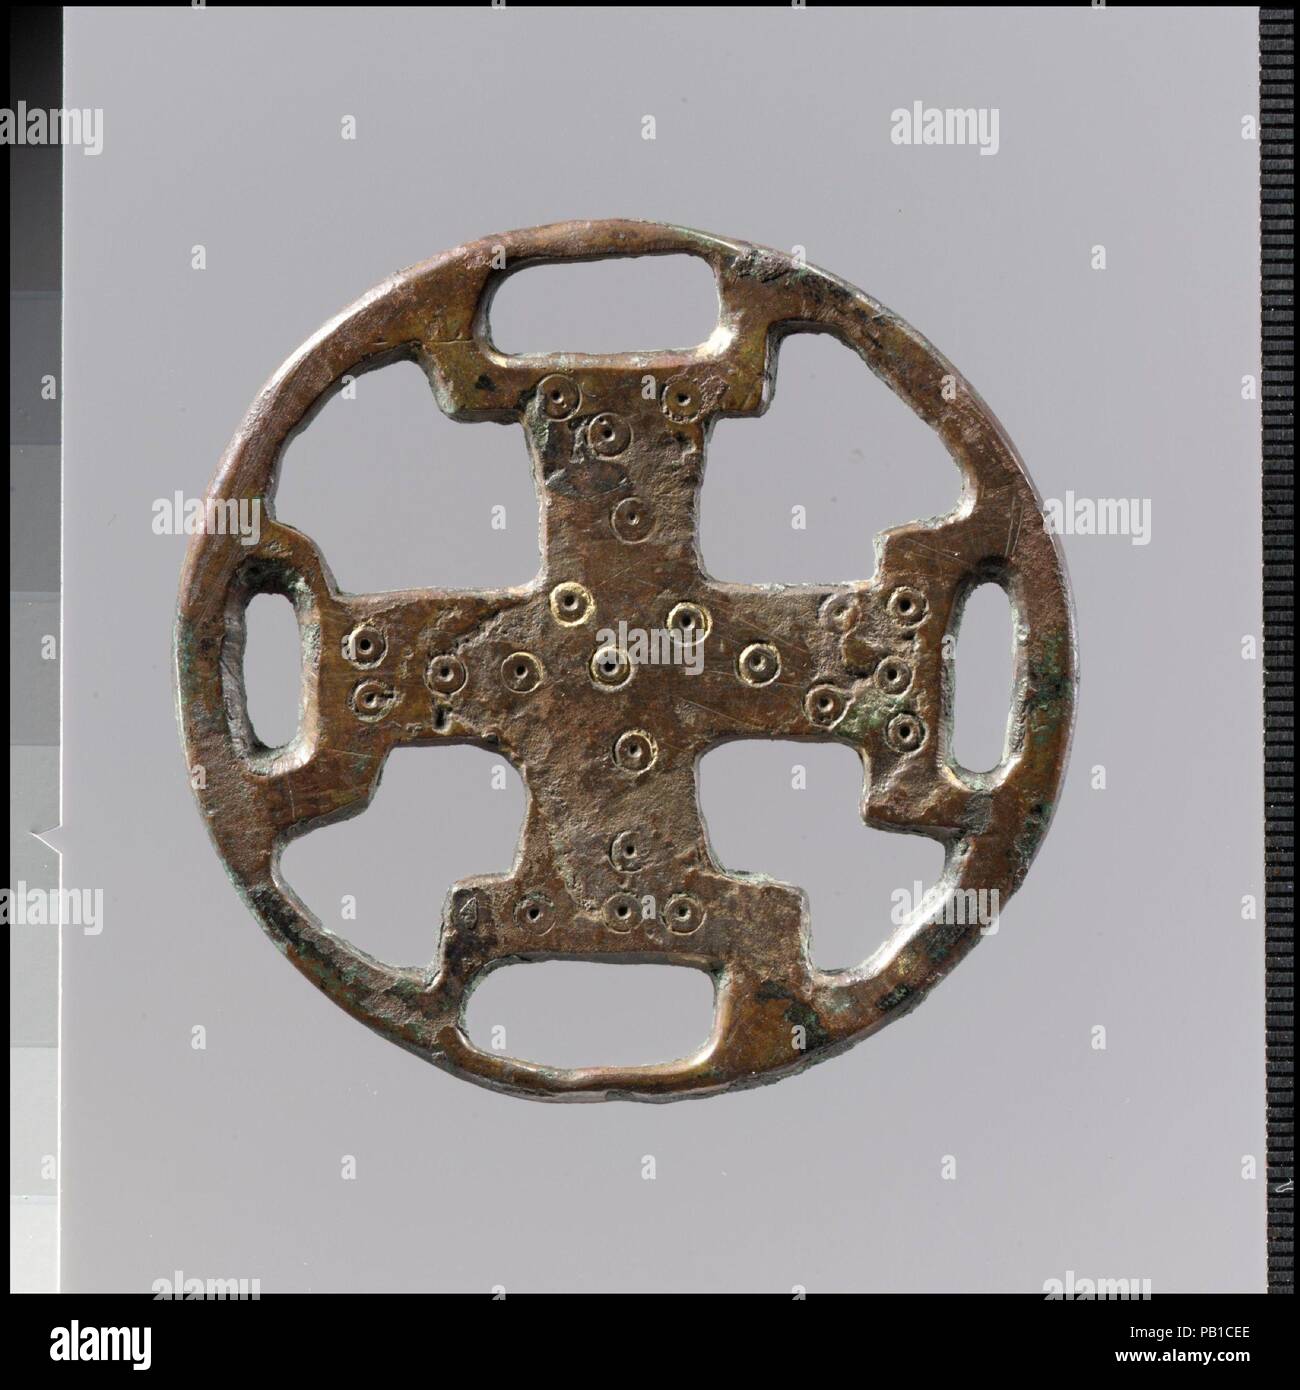 Openwork Belt Fitting. Culture: Frankish. Dimensions: Overall: 2 5/16 x 1/8 in. (5.9 x 0.3 cm). Date: 600-700.  Openwork plaques were hung from a belt by a strap. Such useful objects as combs, keys, or amulets would then be suspended from the plaque by chains or strings. The patterns on these belt fittings ranged from architectural motifs to human figures to abstract designs. Museum: Metropolitan Museum of Art, New York, USA. Stock Photo